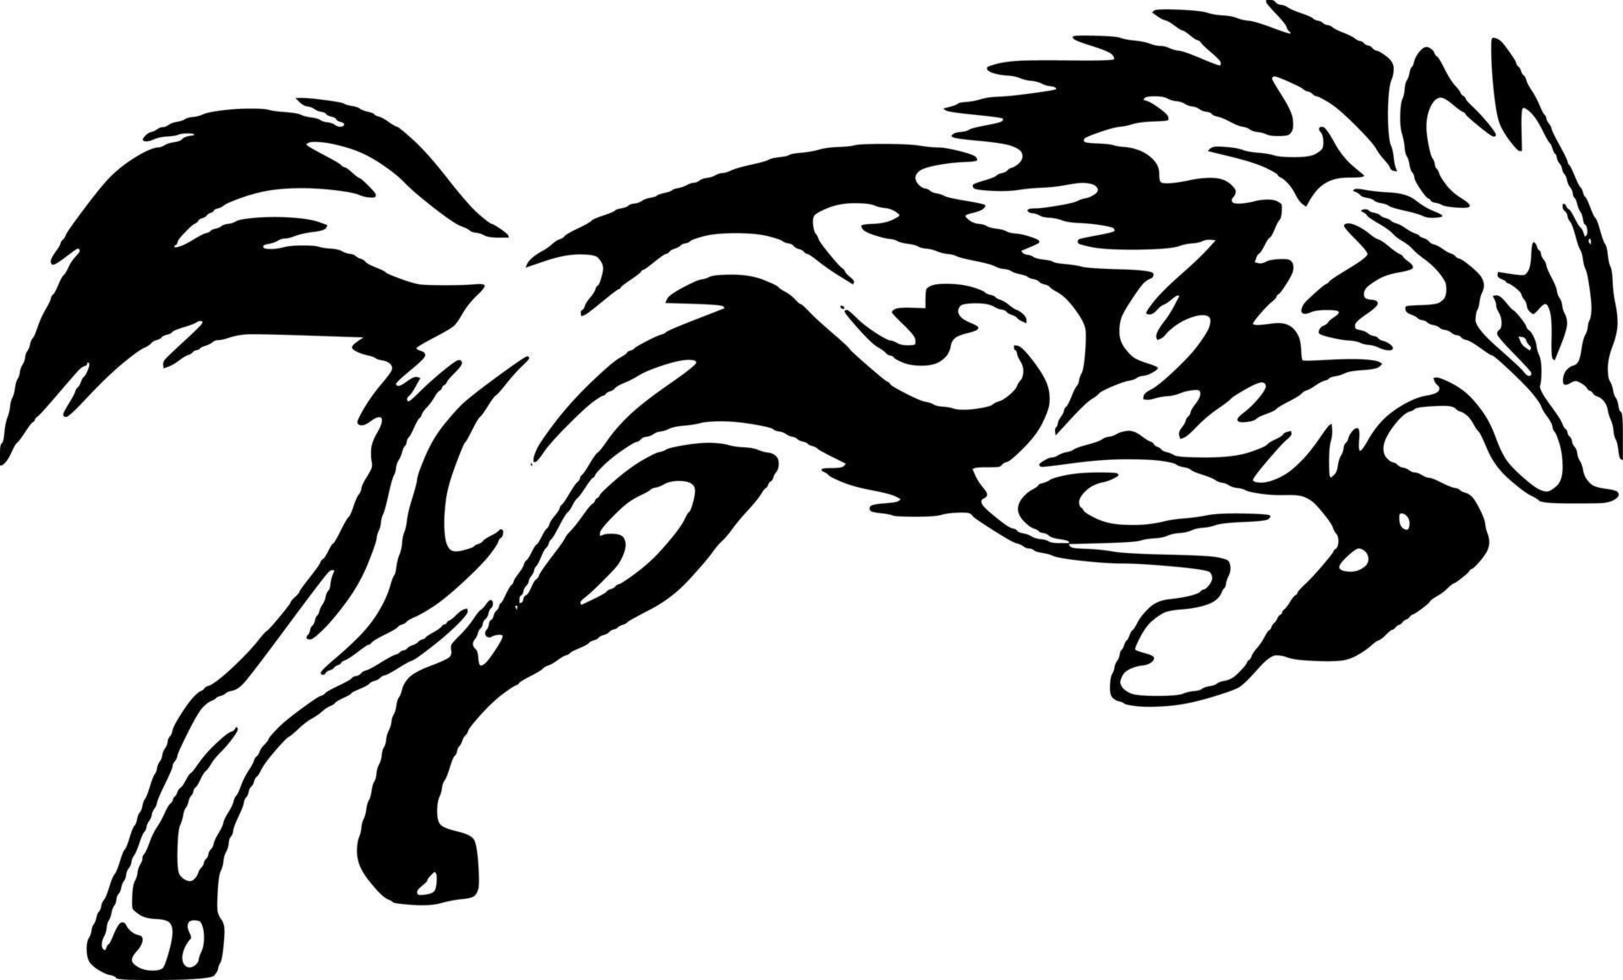 Wolf icon vector